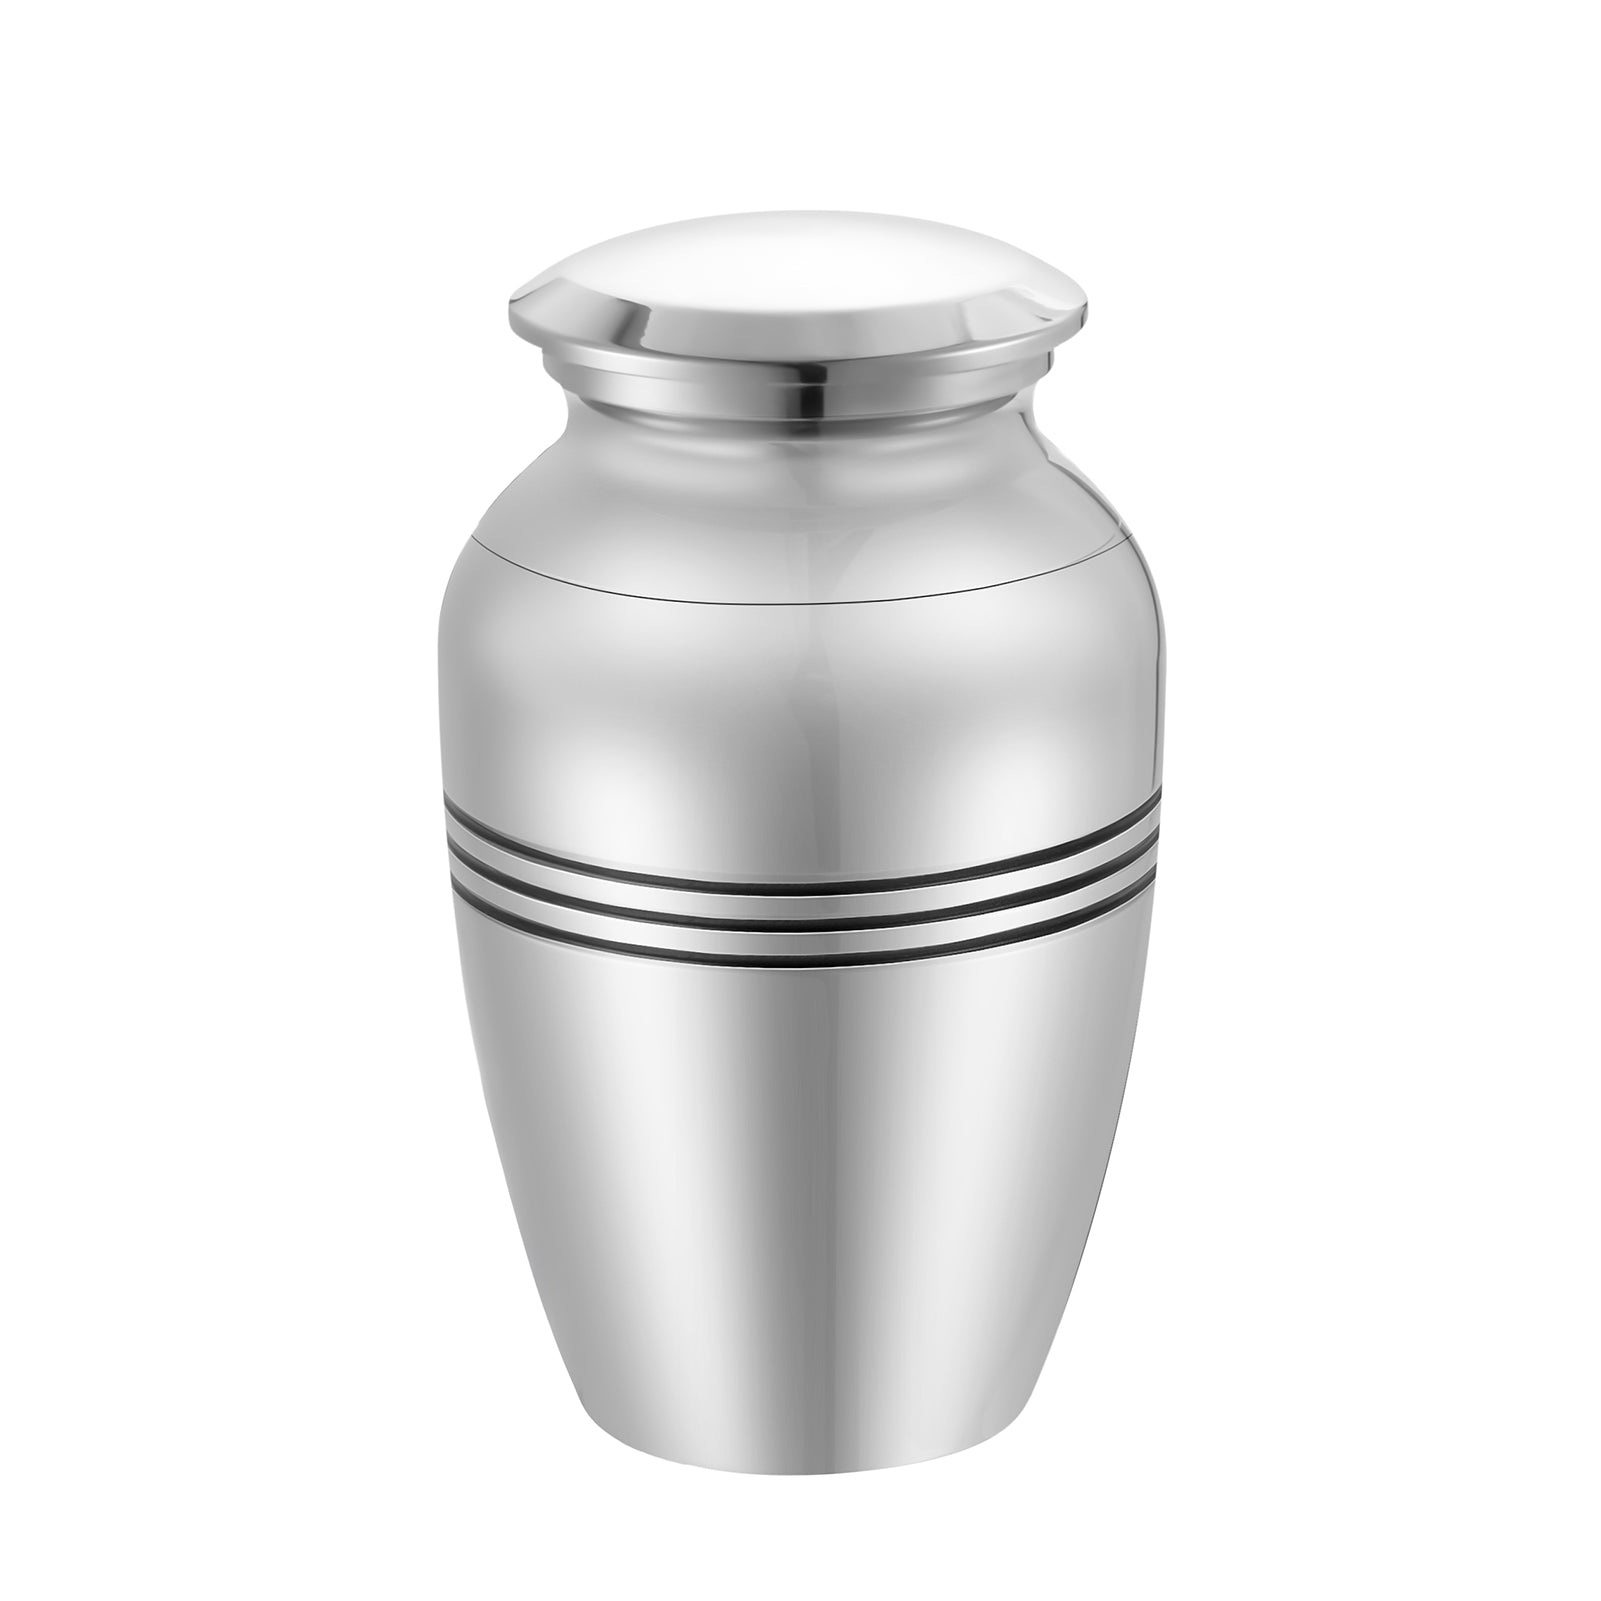 Popular Cremation Urns for Ashes